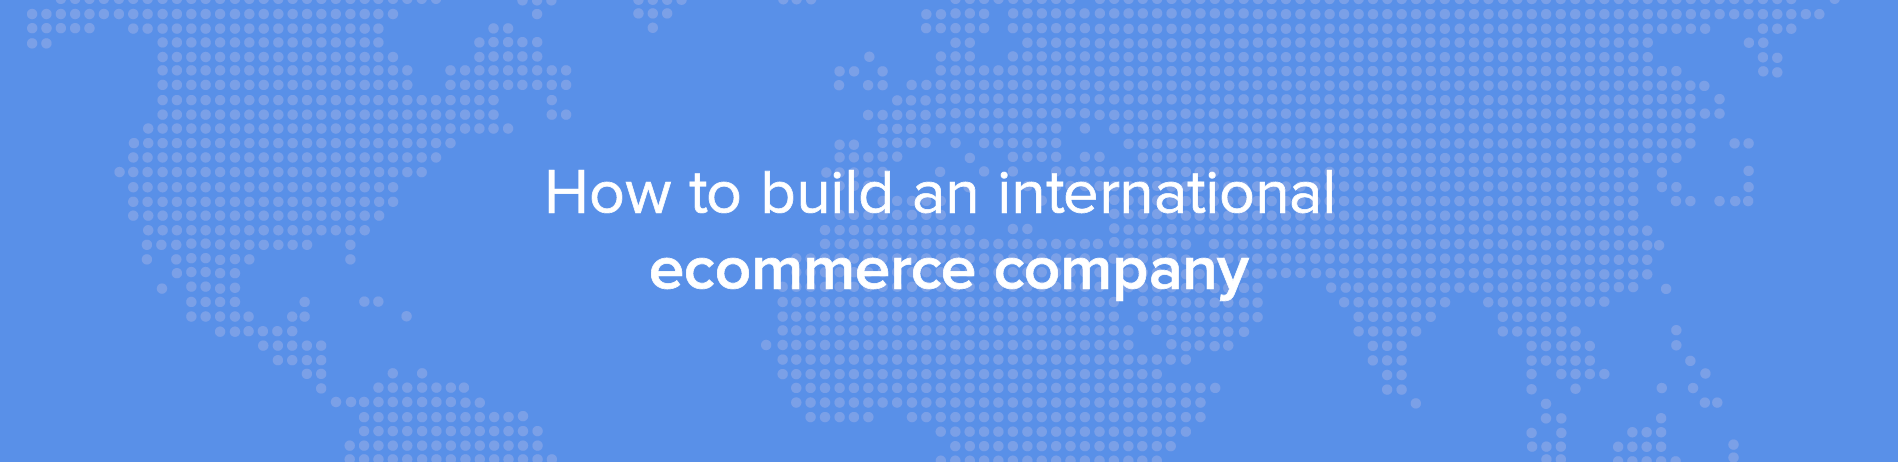 How to build an international ecommerce company